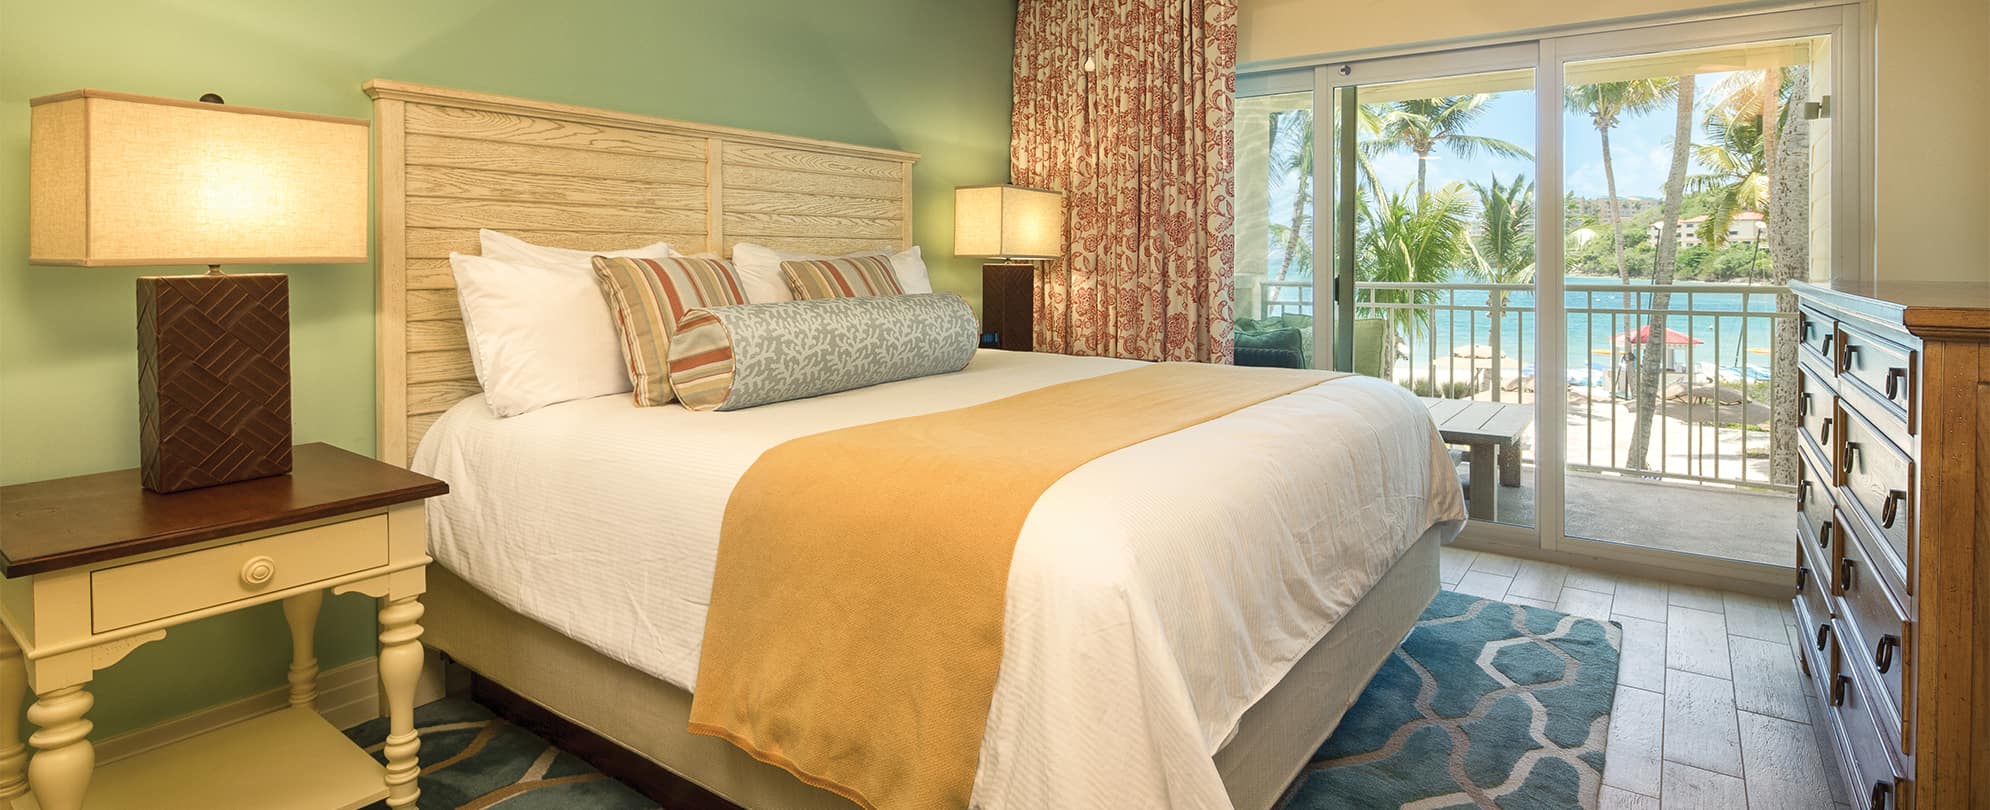 Presidential Reserve bedroom with king bed and ocean view at Margaritaville Vacation Club by Wyndham - St. Thomas.